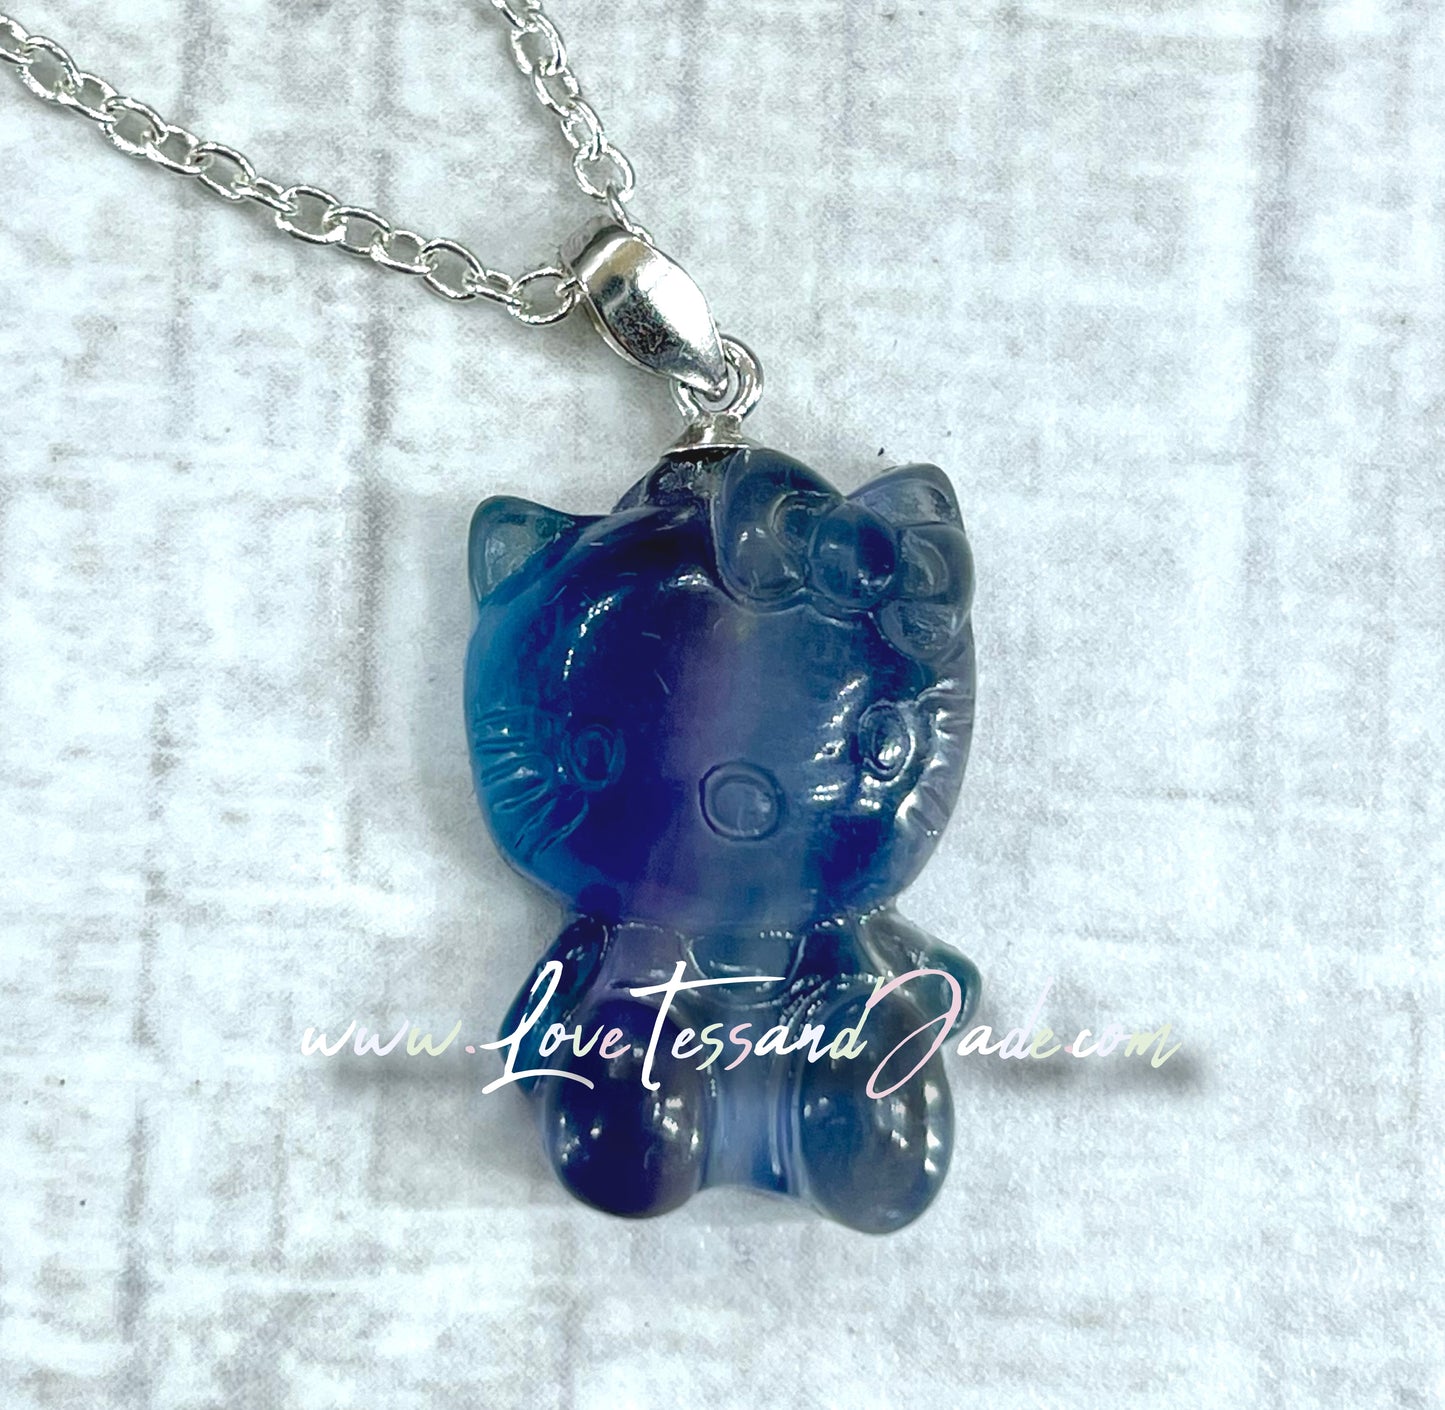 Kitty Kitty | Crystal |  Natural | Healing Crystal | Hand-Craved | Gemstone | Pendant | Necklace | 925 Plated Chain